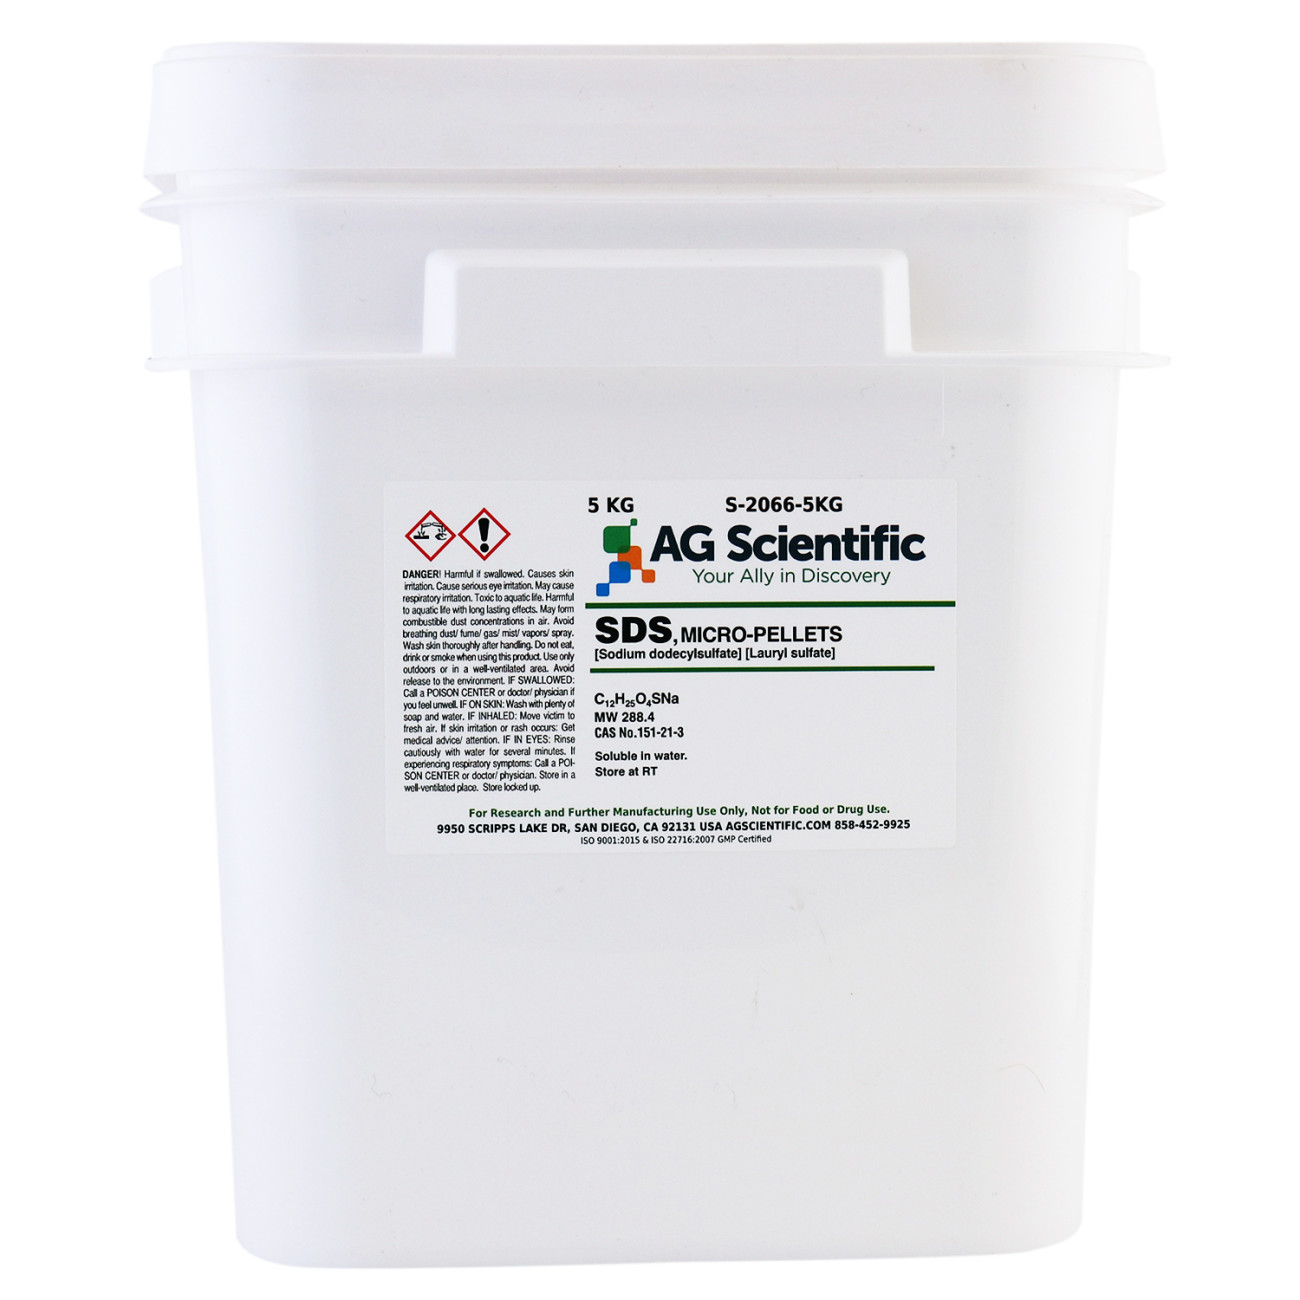 SDS [Sodium Dodecyl Sulfate], Micro-Pellets, 5 KG